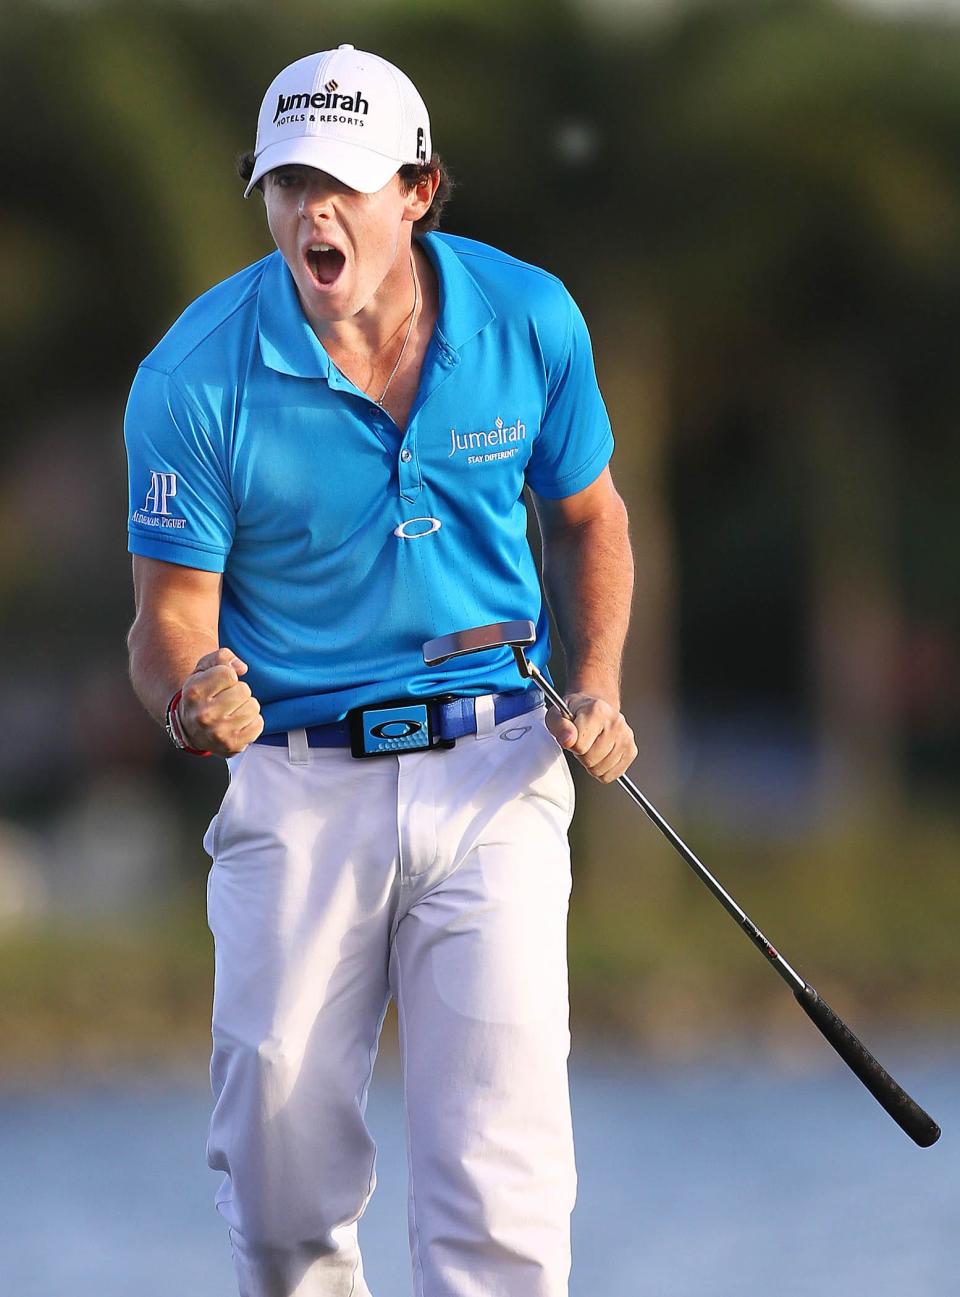 030412(Bill Ingram / Palm Beach Post): Palm Beach Gardens: Rory McIlroy reacts after making his par putt to win the Honda Classic and become No. 1 in the world at the 18th green during the final round of the 2012 Honda Classic at PGA National in March 2012.